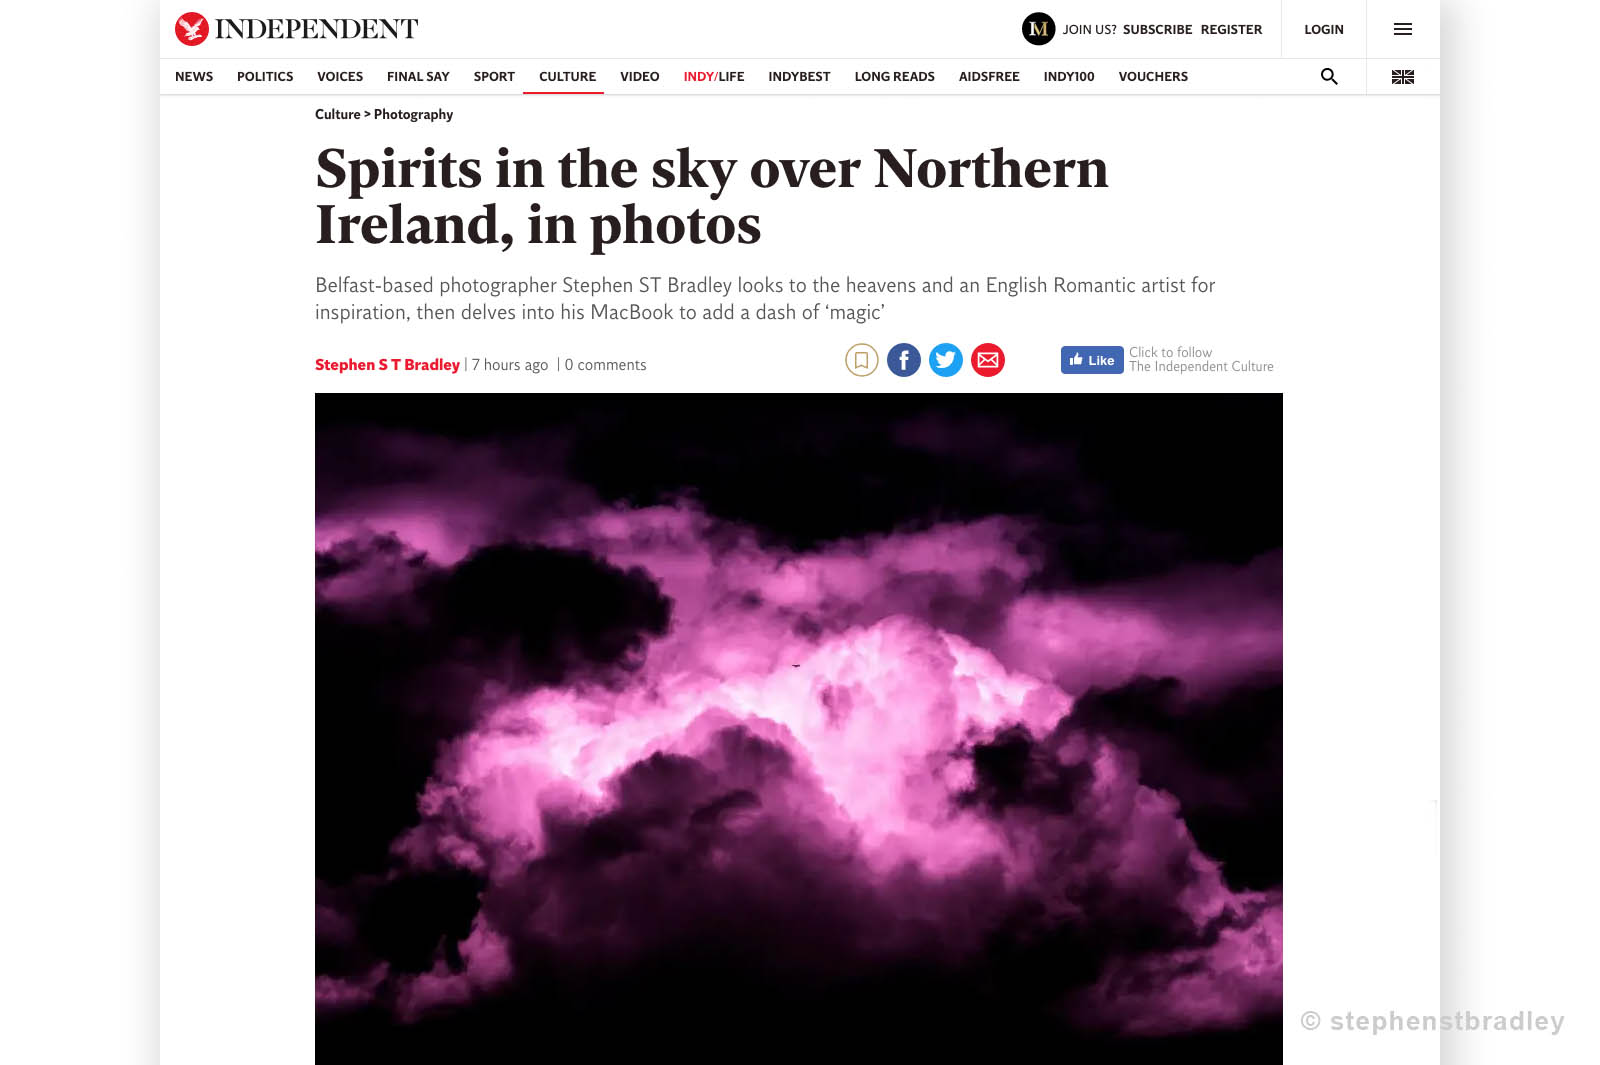 Editorial photography portfolio - top of web page of The Independent newspaper UK featuring a story on the fine art photography of  Stephen S T Bradley